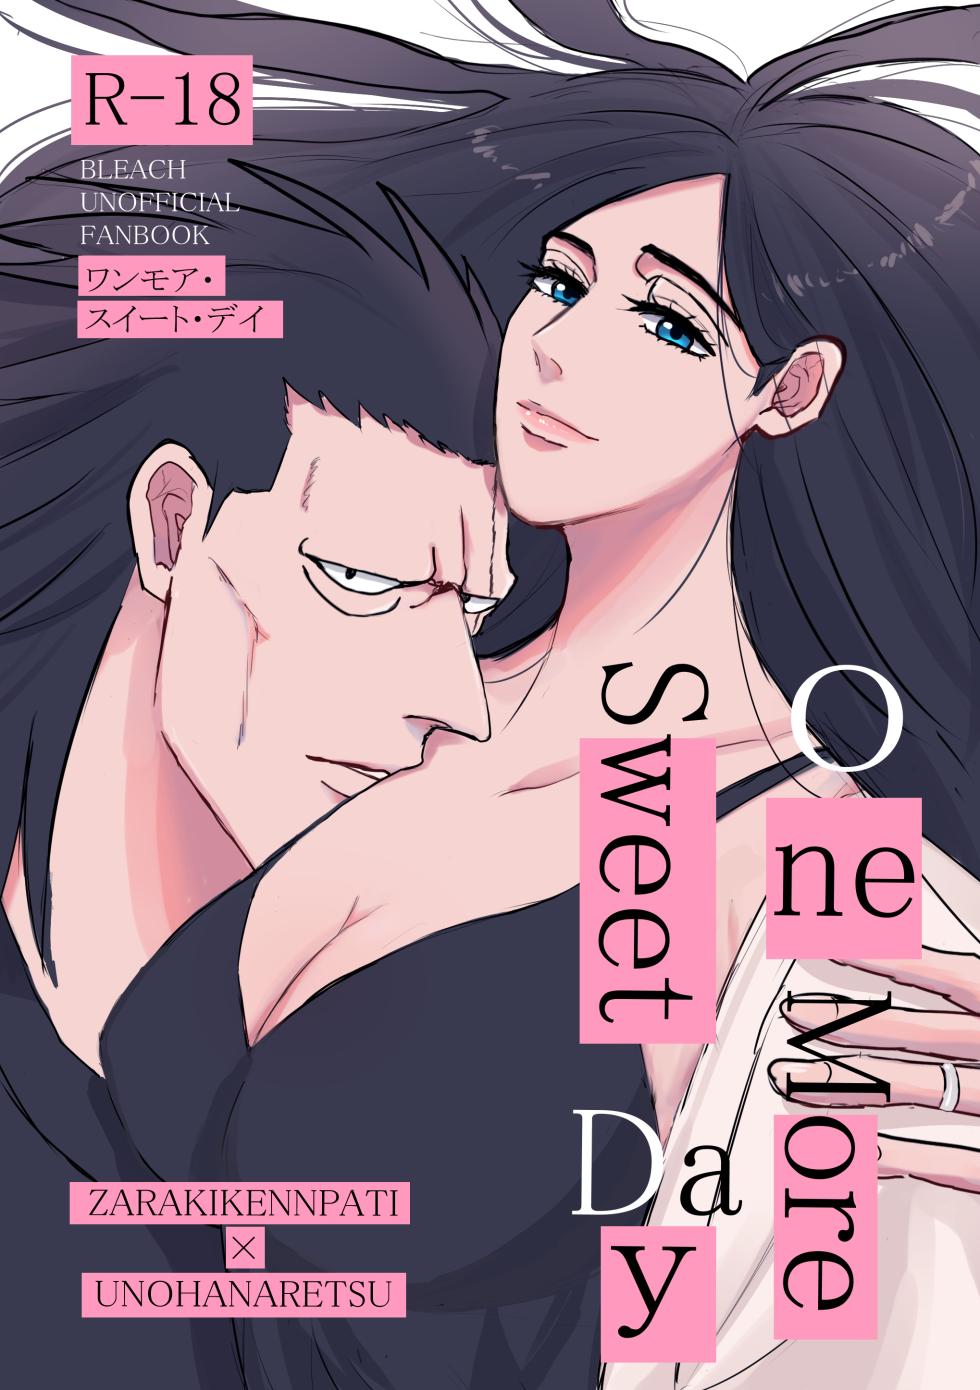 [Last (sukihodai63)] One More Sweet Day (Bleach) [sample] - Page 1